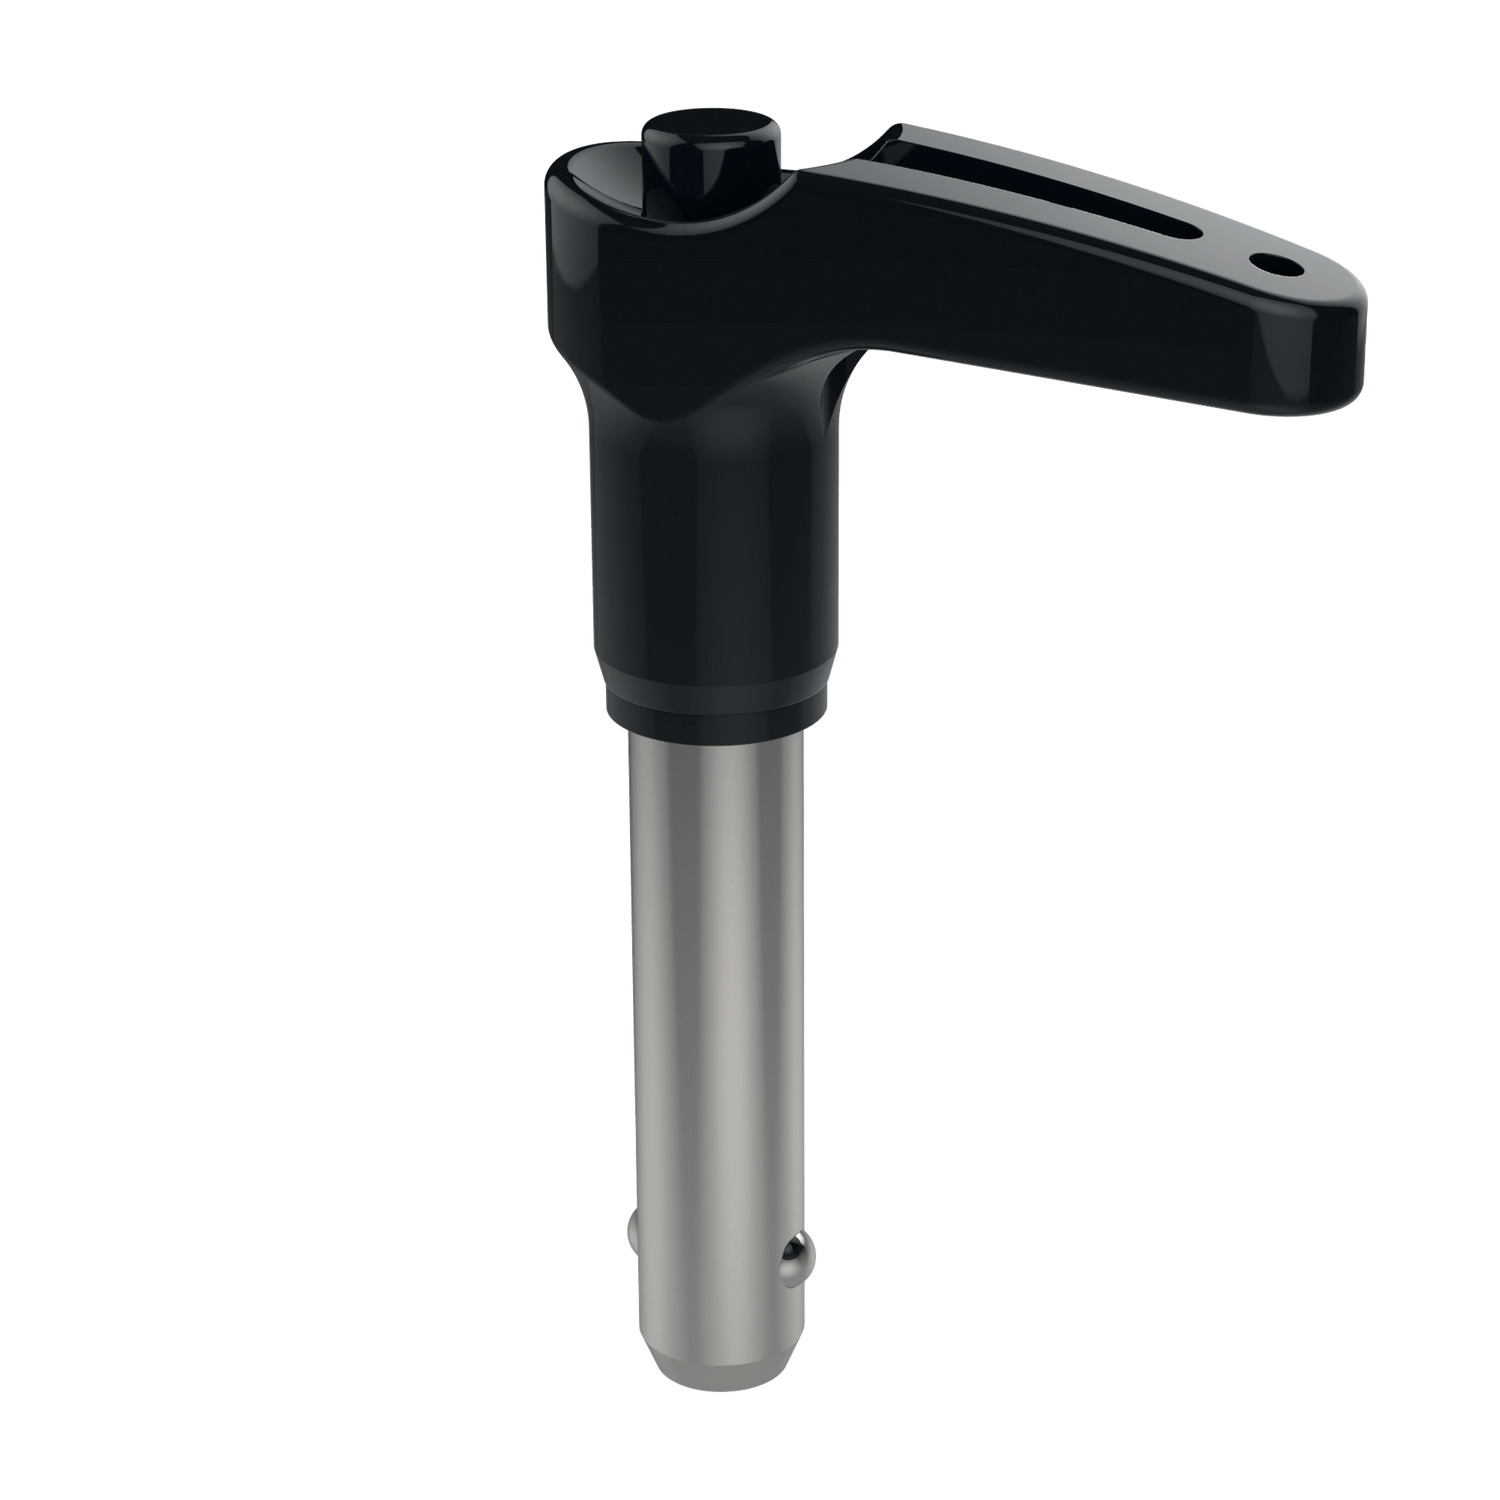 Ball Lock Pins - Single Acting - L-Handle L-Handle ball lock pins available in stainless steel; AISI 303 and the AISI 630 with twice the shear force. This anti-glare finish is excellent for stage rigging applications.